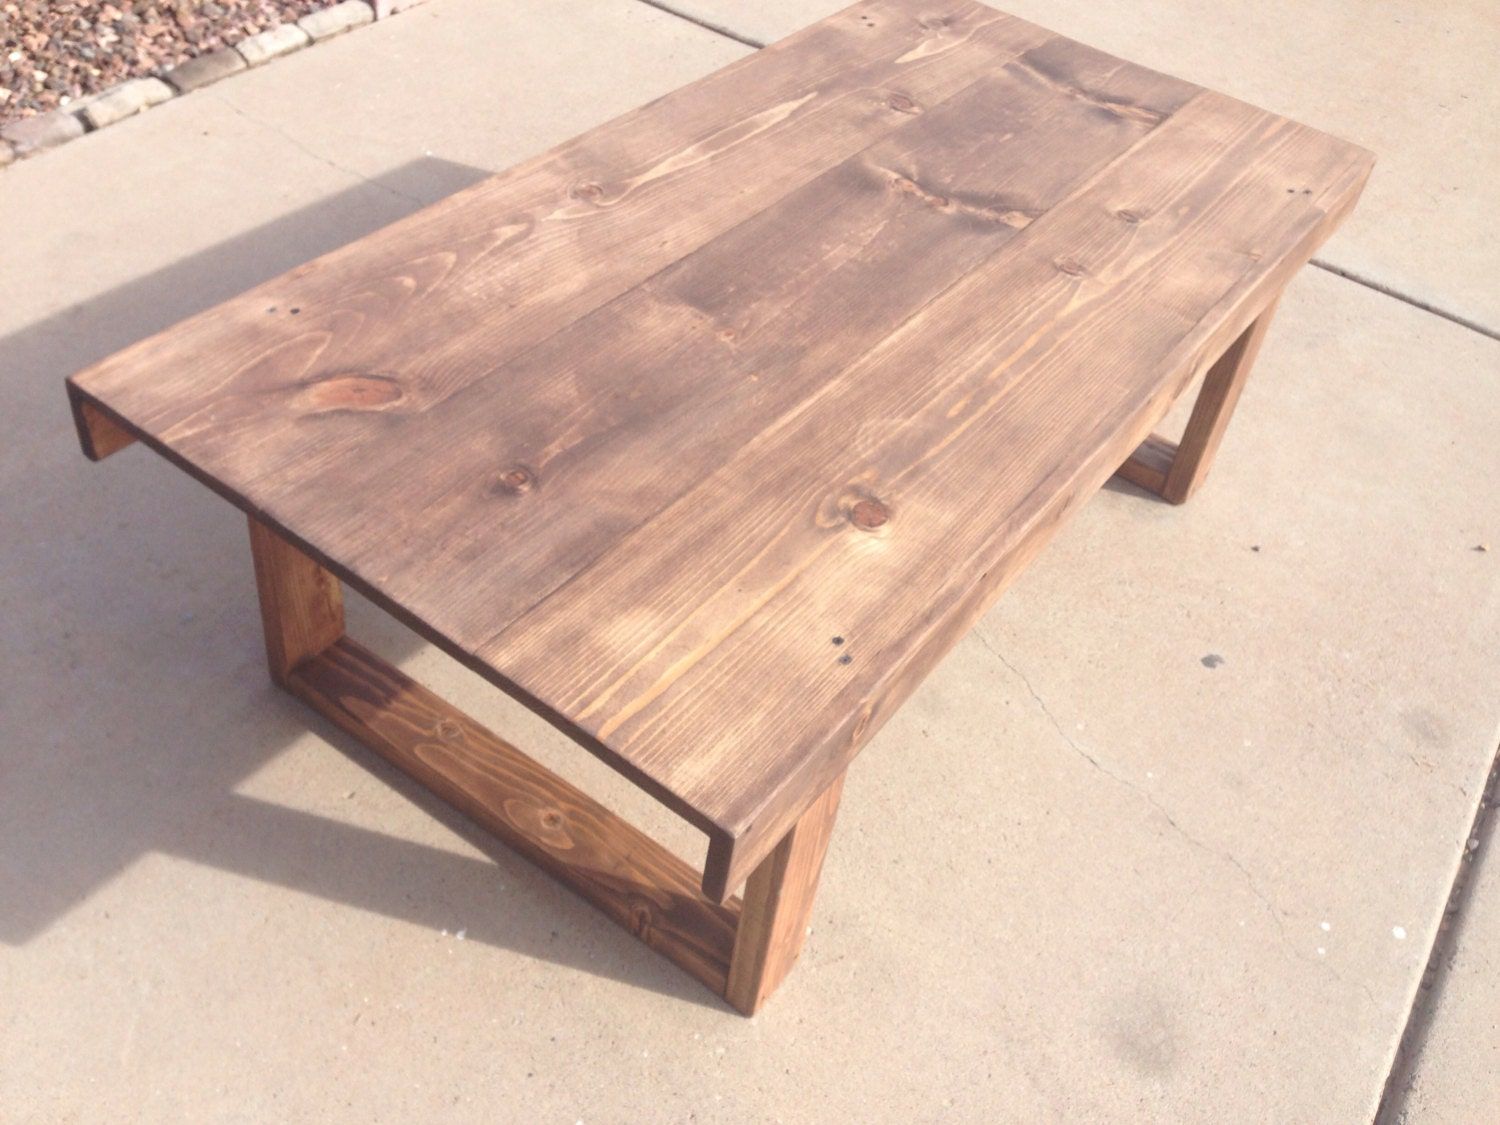 Handmade Larger Rustic Coffee Table In Walnut In Rustic Walnut Wood Coffee Tables (View 10 of 15)